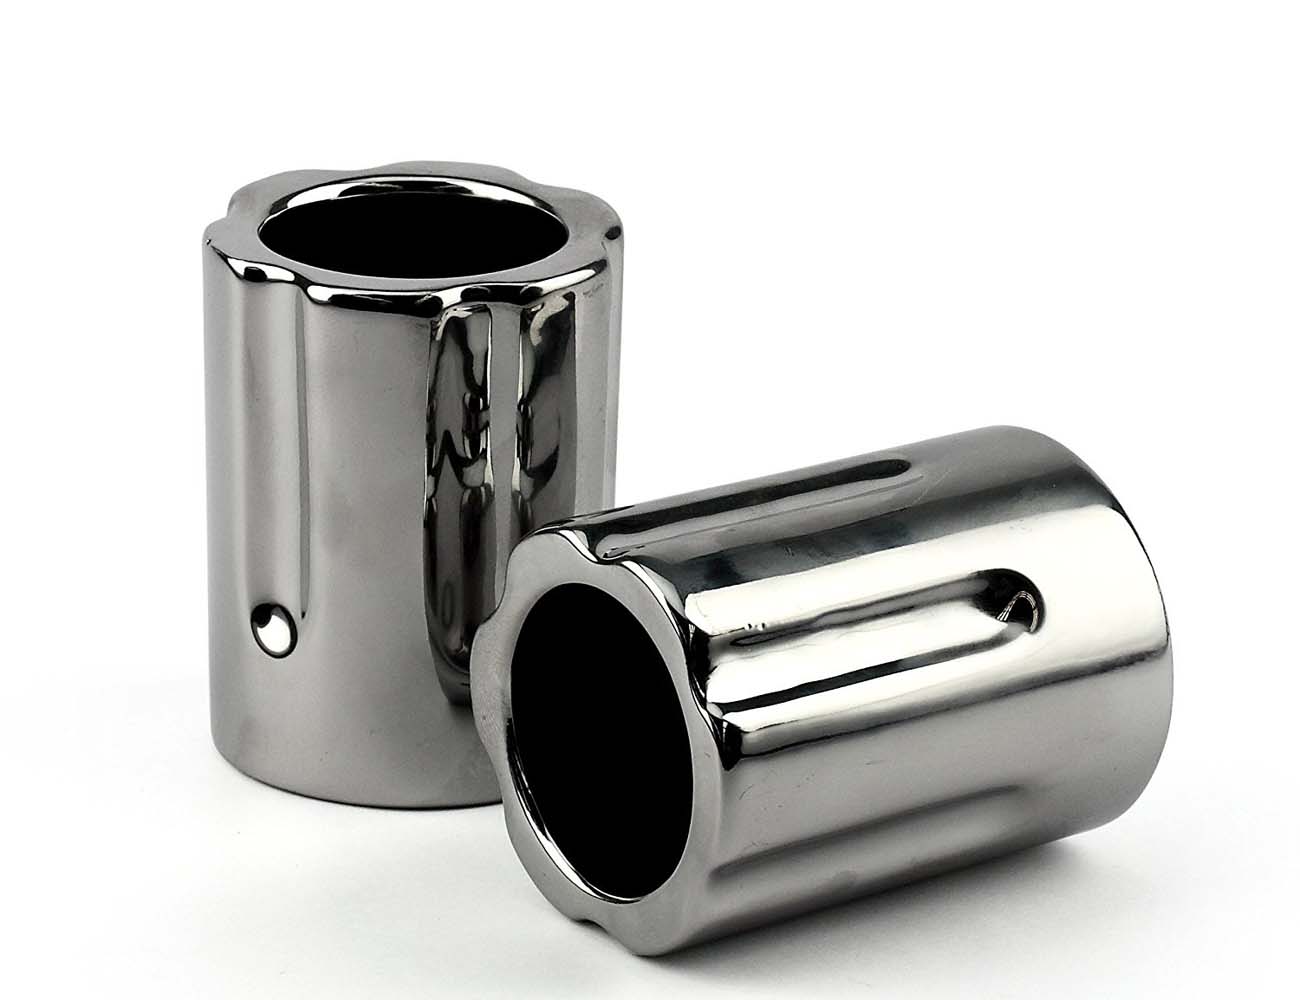 Revolver Shot Glasses – Great For Hunters and Themed Parties